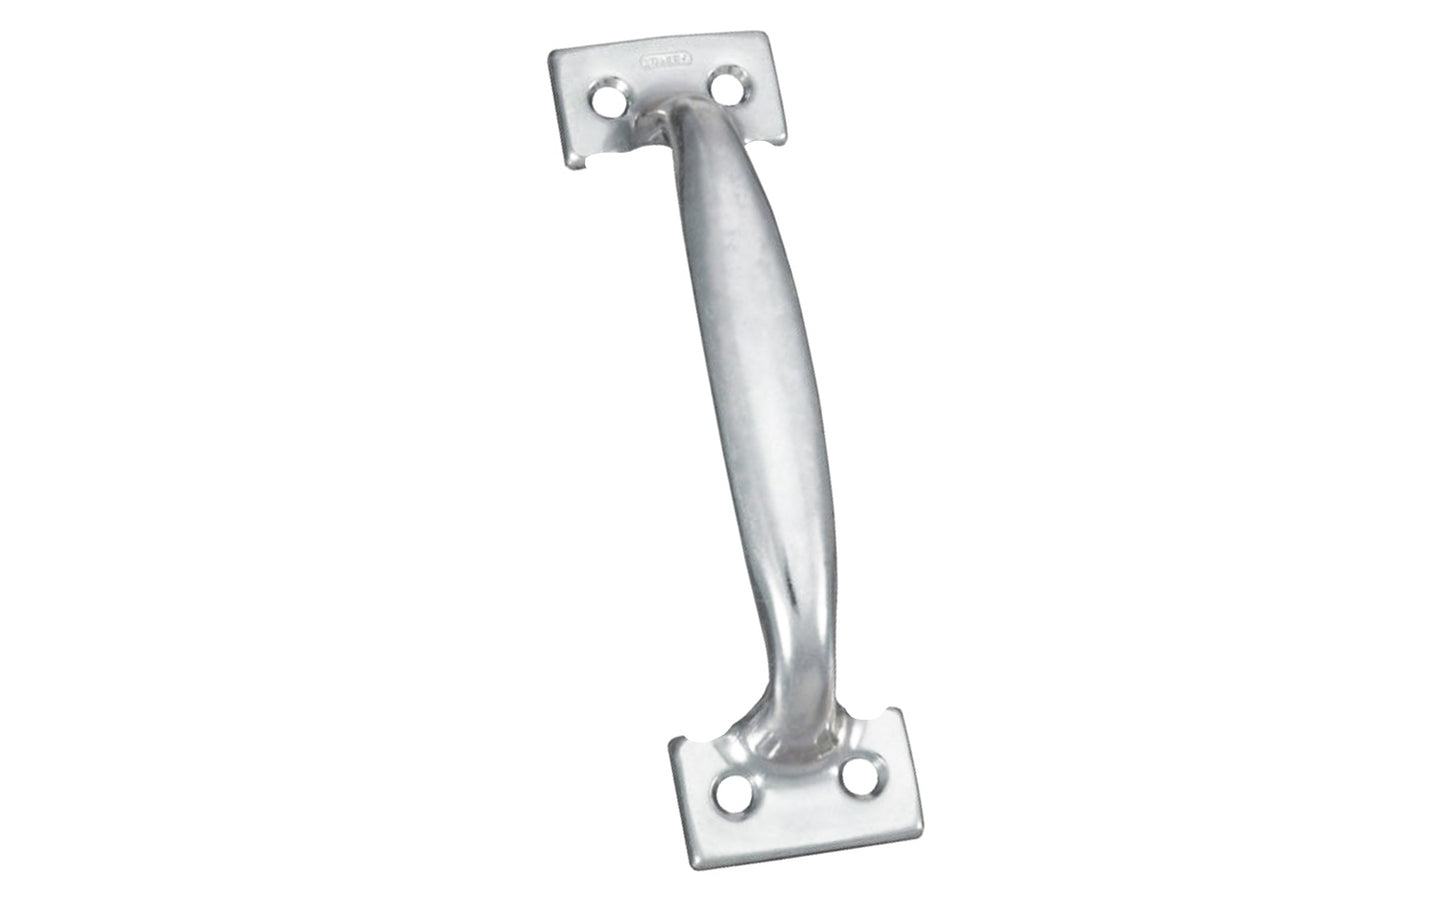 This zinc-plated utility pull is designed for general use on drawers, doors, & a variety of other applications. Includes fasteners. Made of steel material with zinc plated finish. Available 5-3/4" overall size & 6-1/2" overall sizes.